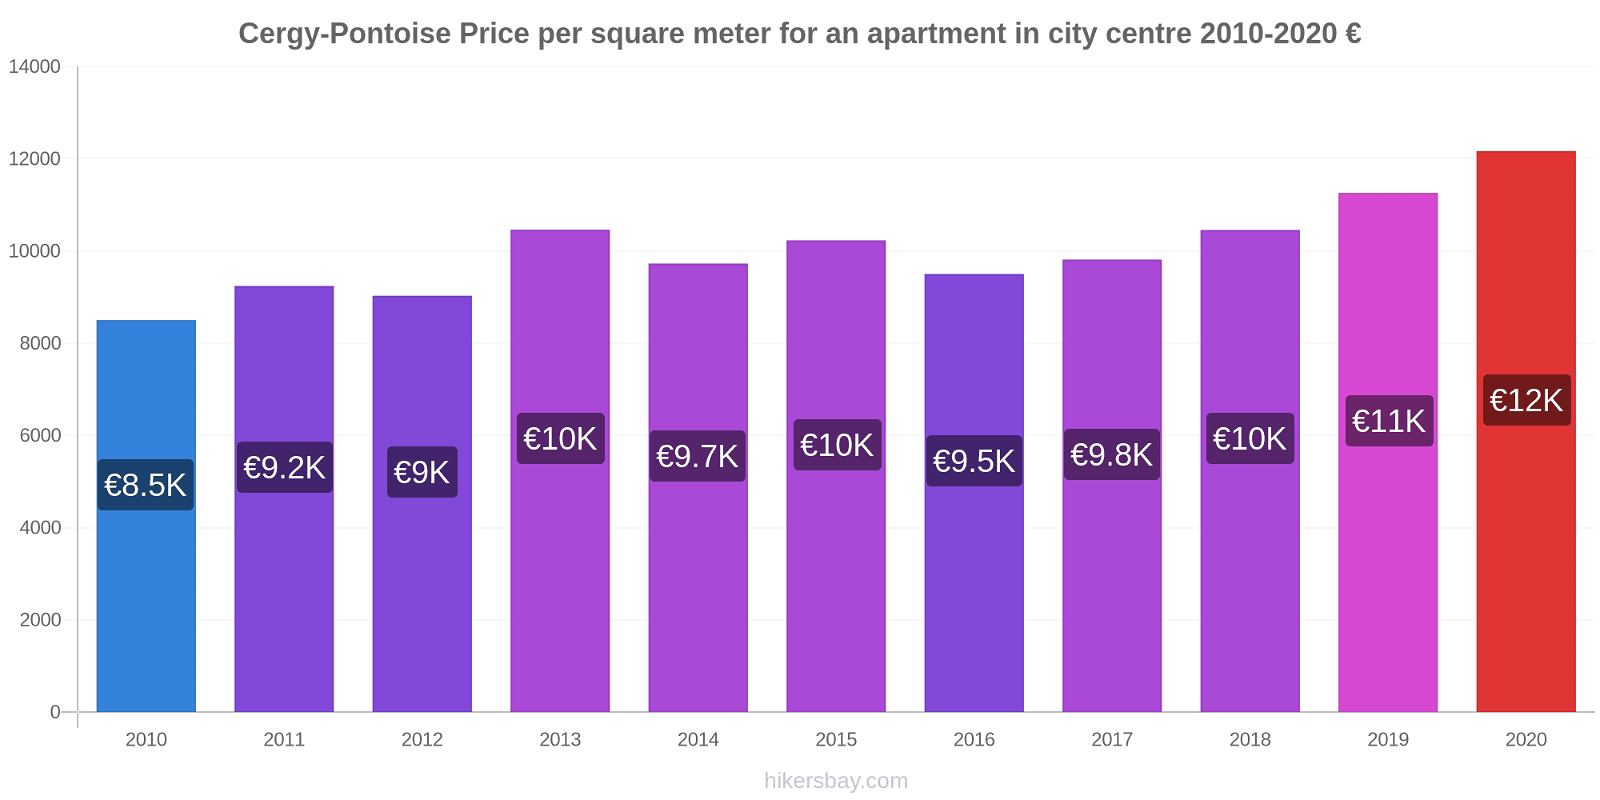 Cergy-Pontoise price changes Price per square meter for an apartment in city centre hikersbay.com